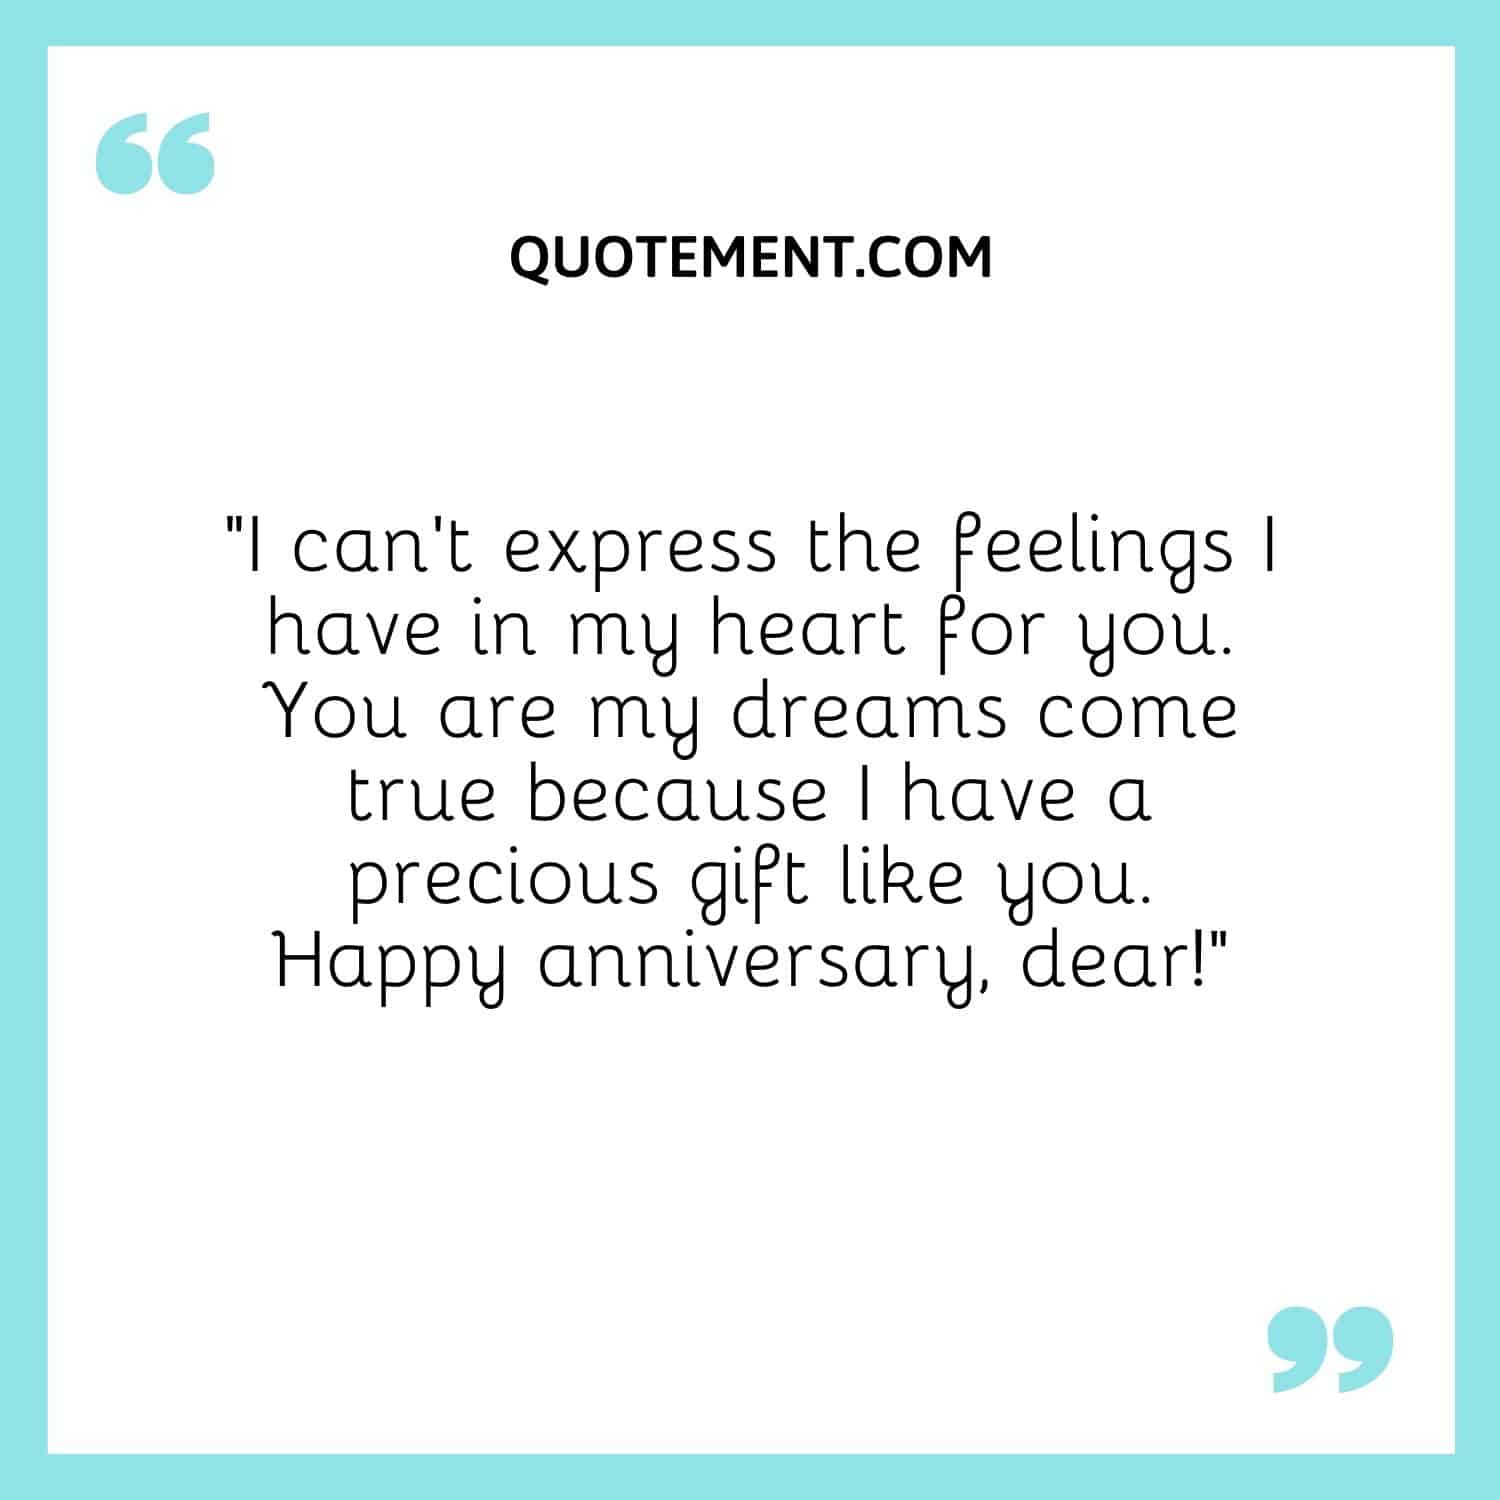 “I can’t express the feelings I have in my heart for you. You are my dreams come true because I have a precious gift like you. Happy anniversary, dear!”